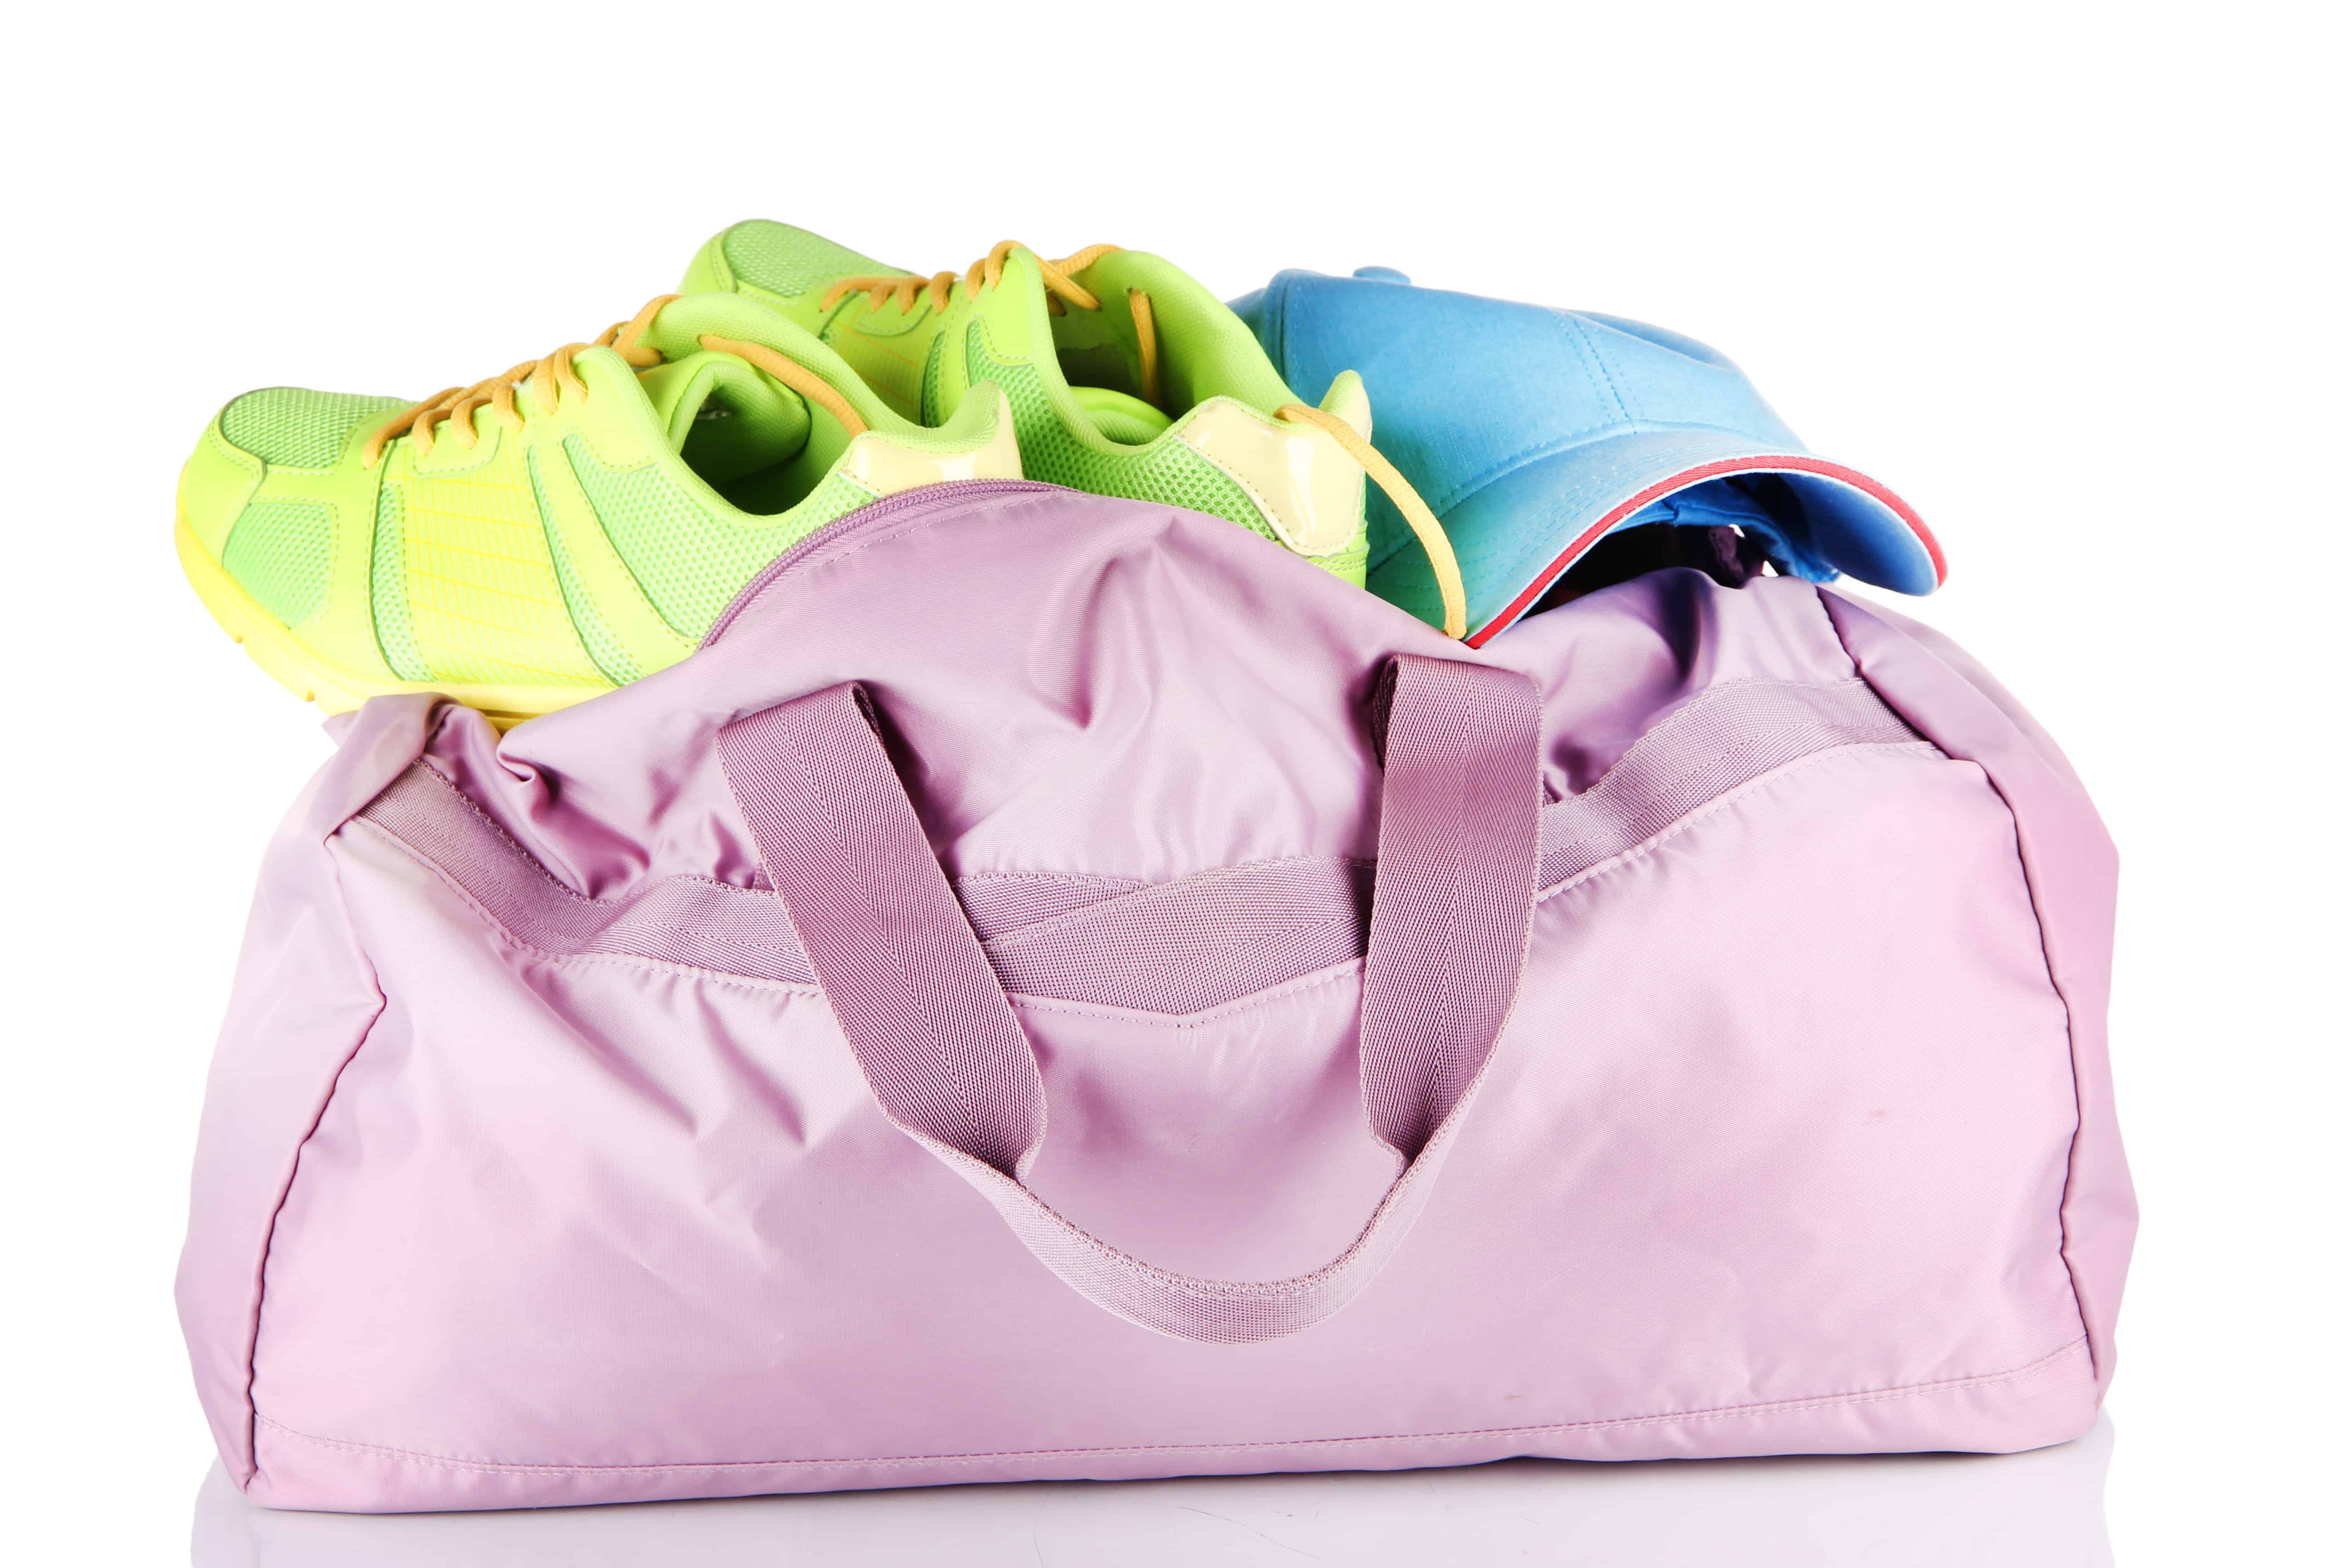 The perfect tennis gift for women is a designer tennis bag